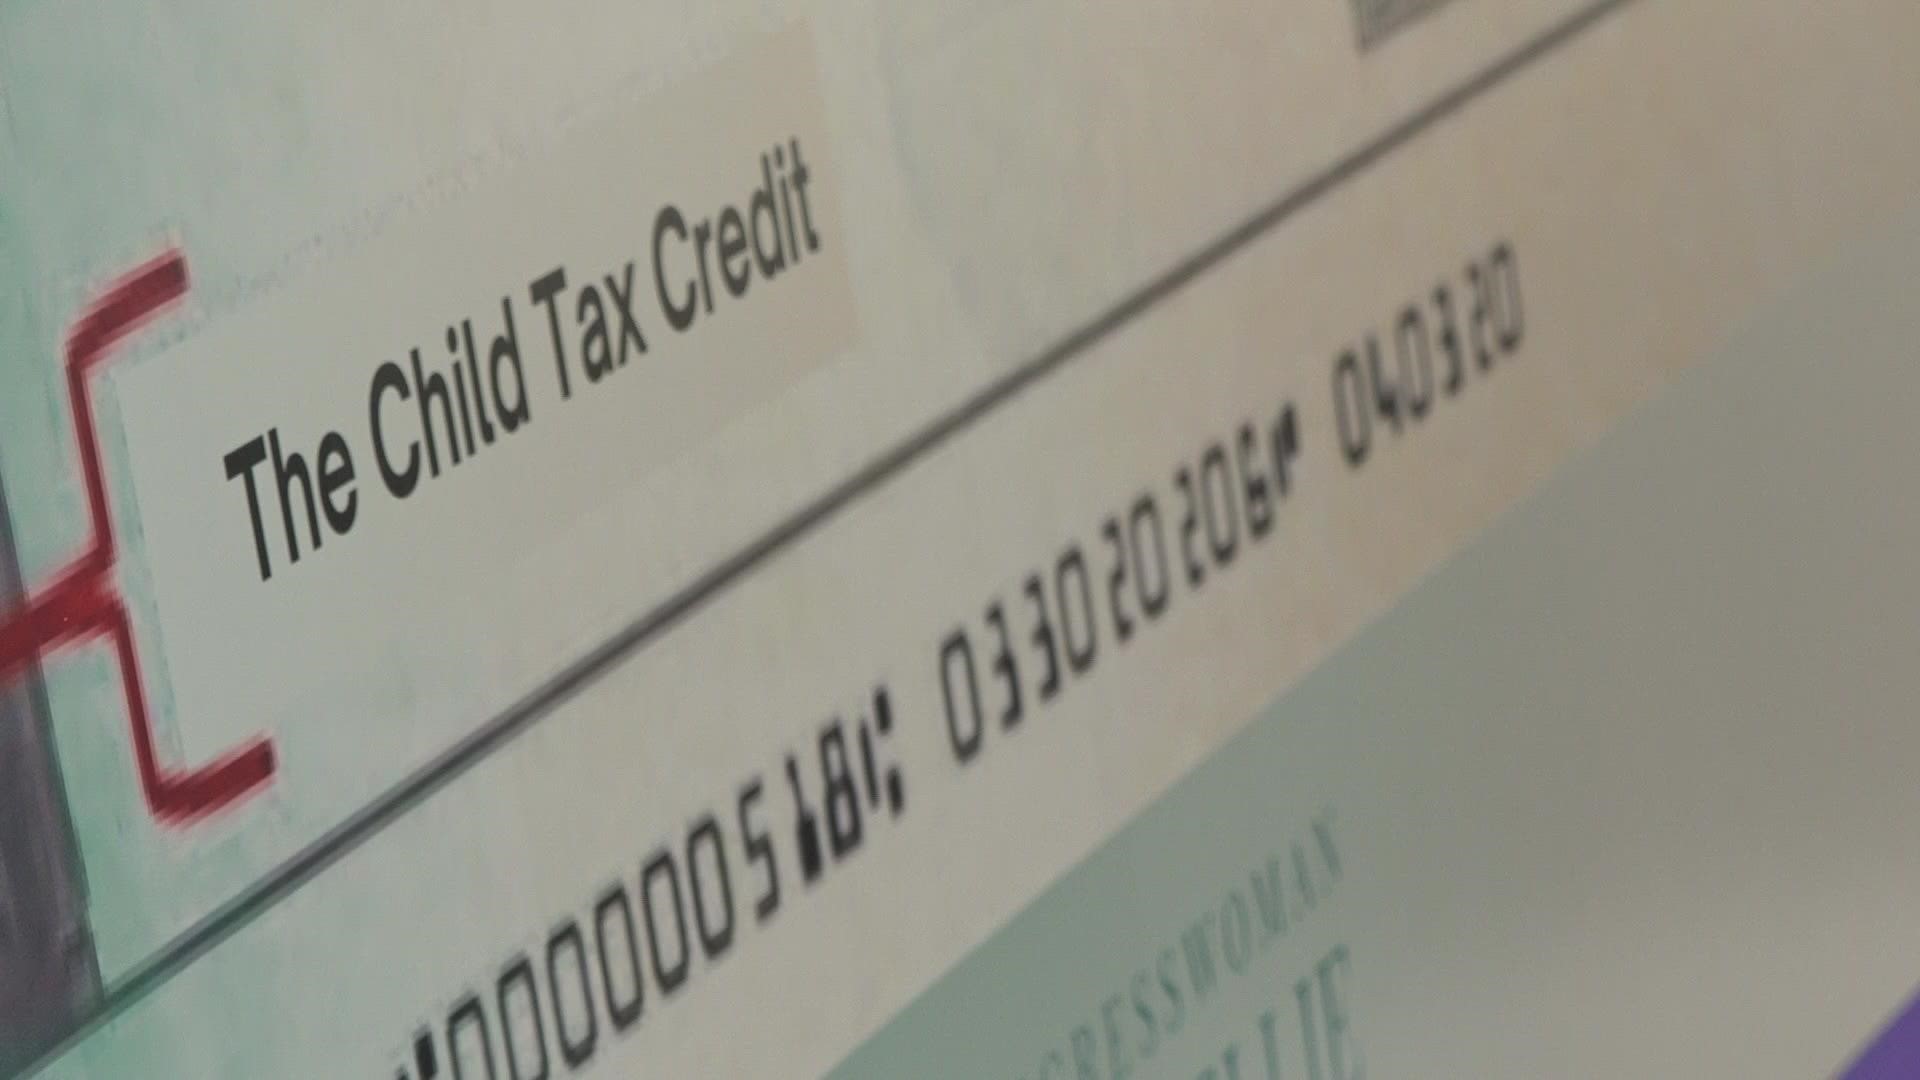 The Child Tax Credit was expanded by Congress and is now sending monthly payments to families that qualify.